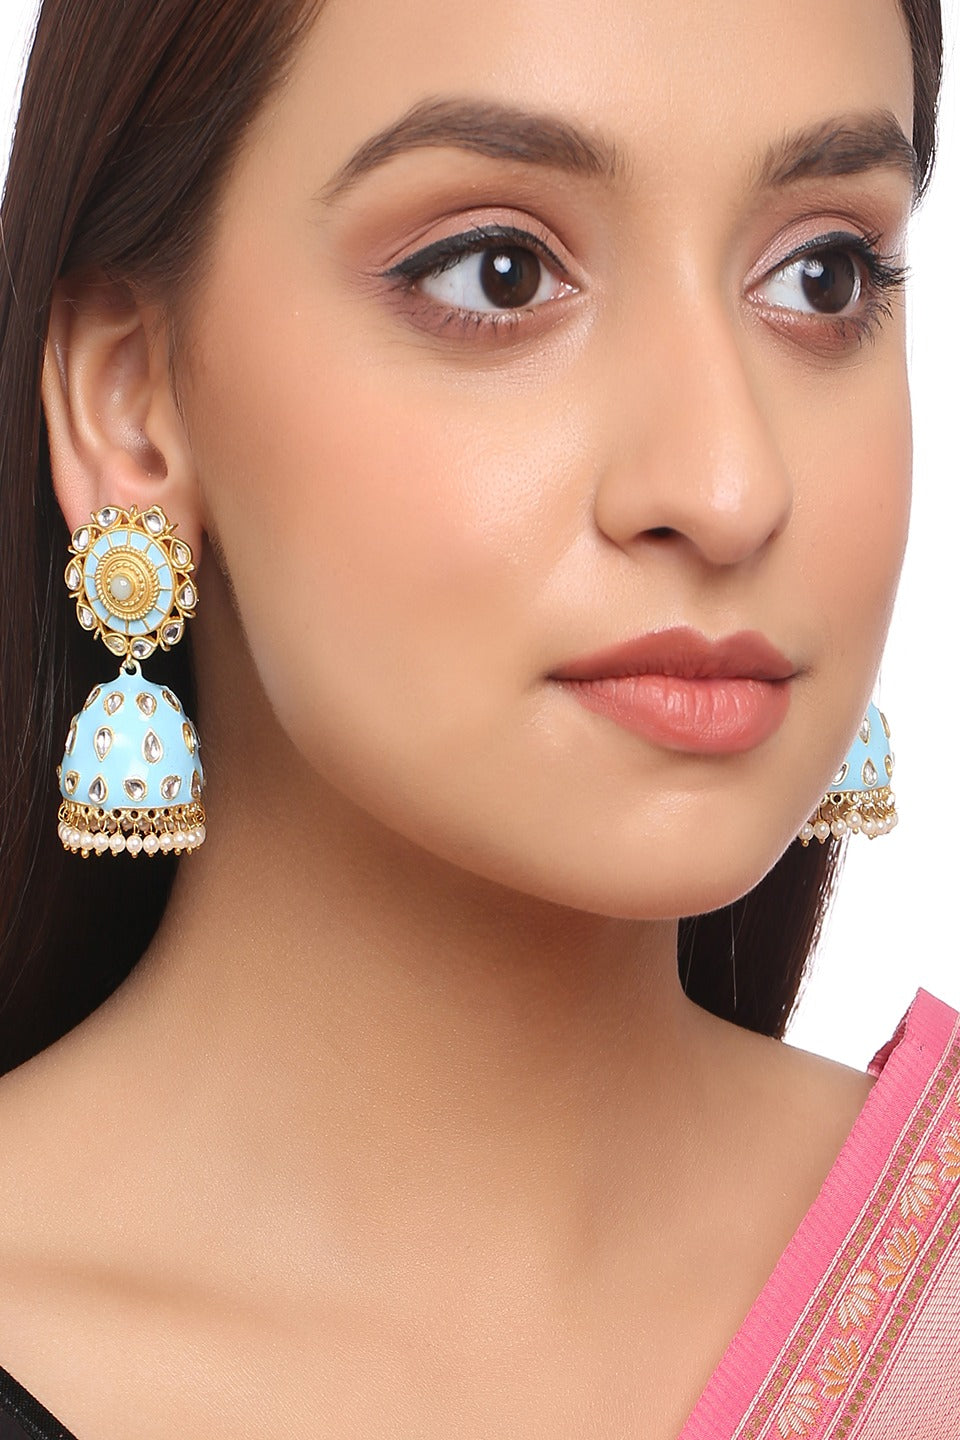 Flamingo Jhumka earrings with White pearls & Multicolored threads - Desi  Royale